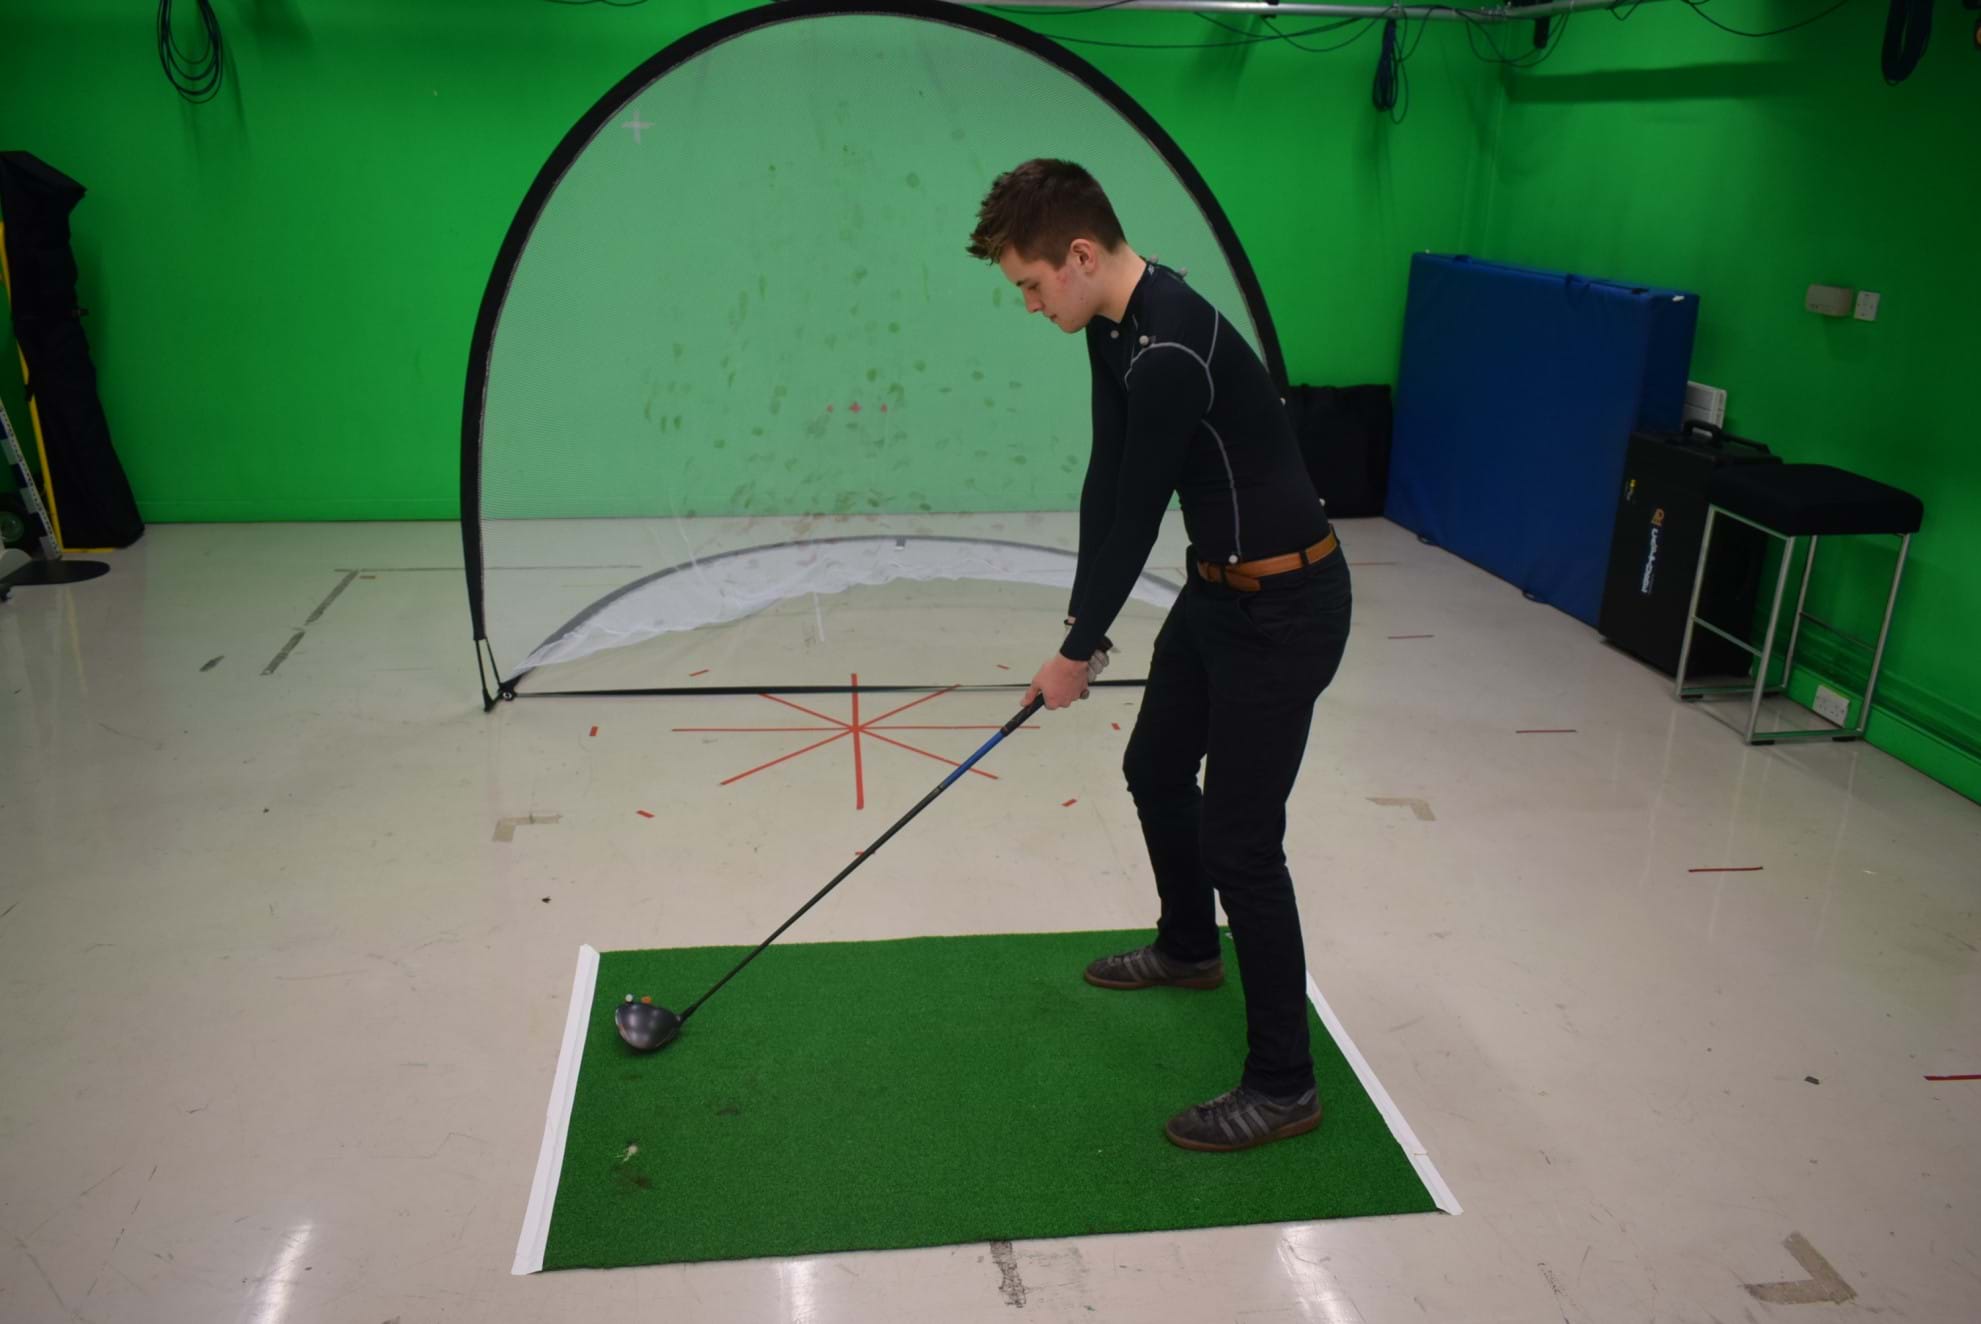 A golfer in a motion capture suit